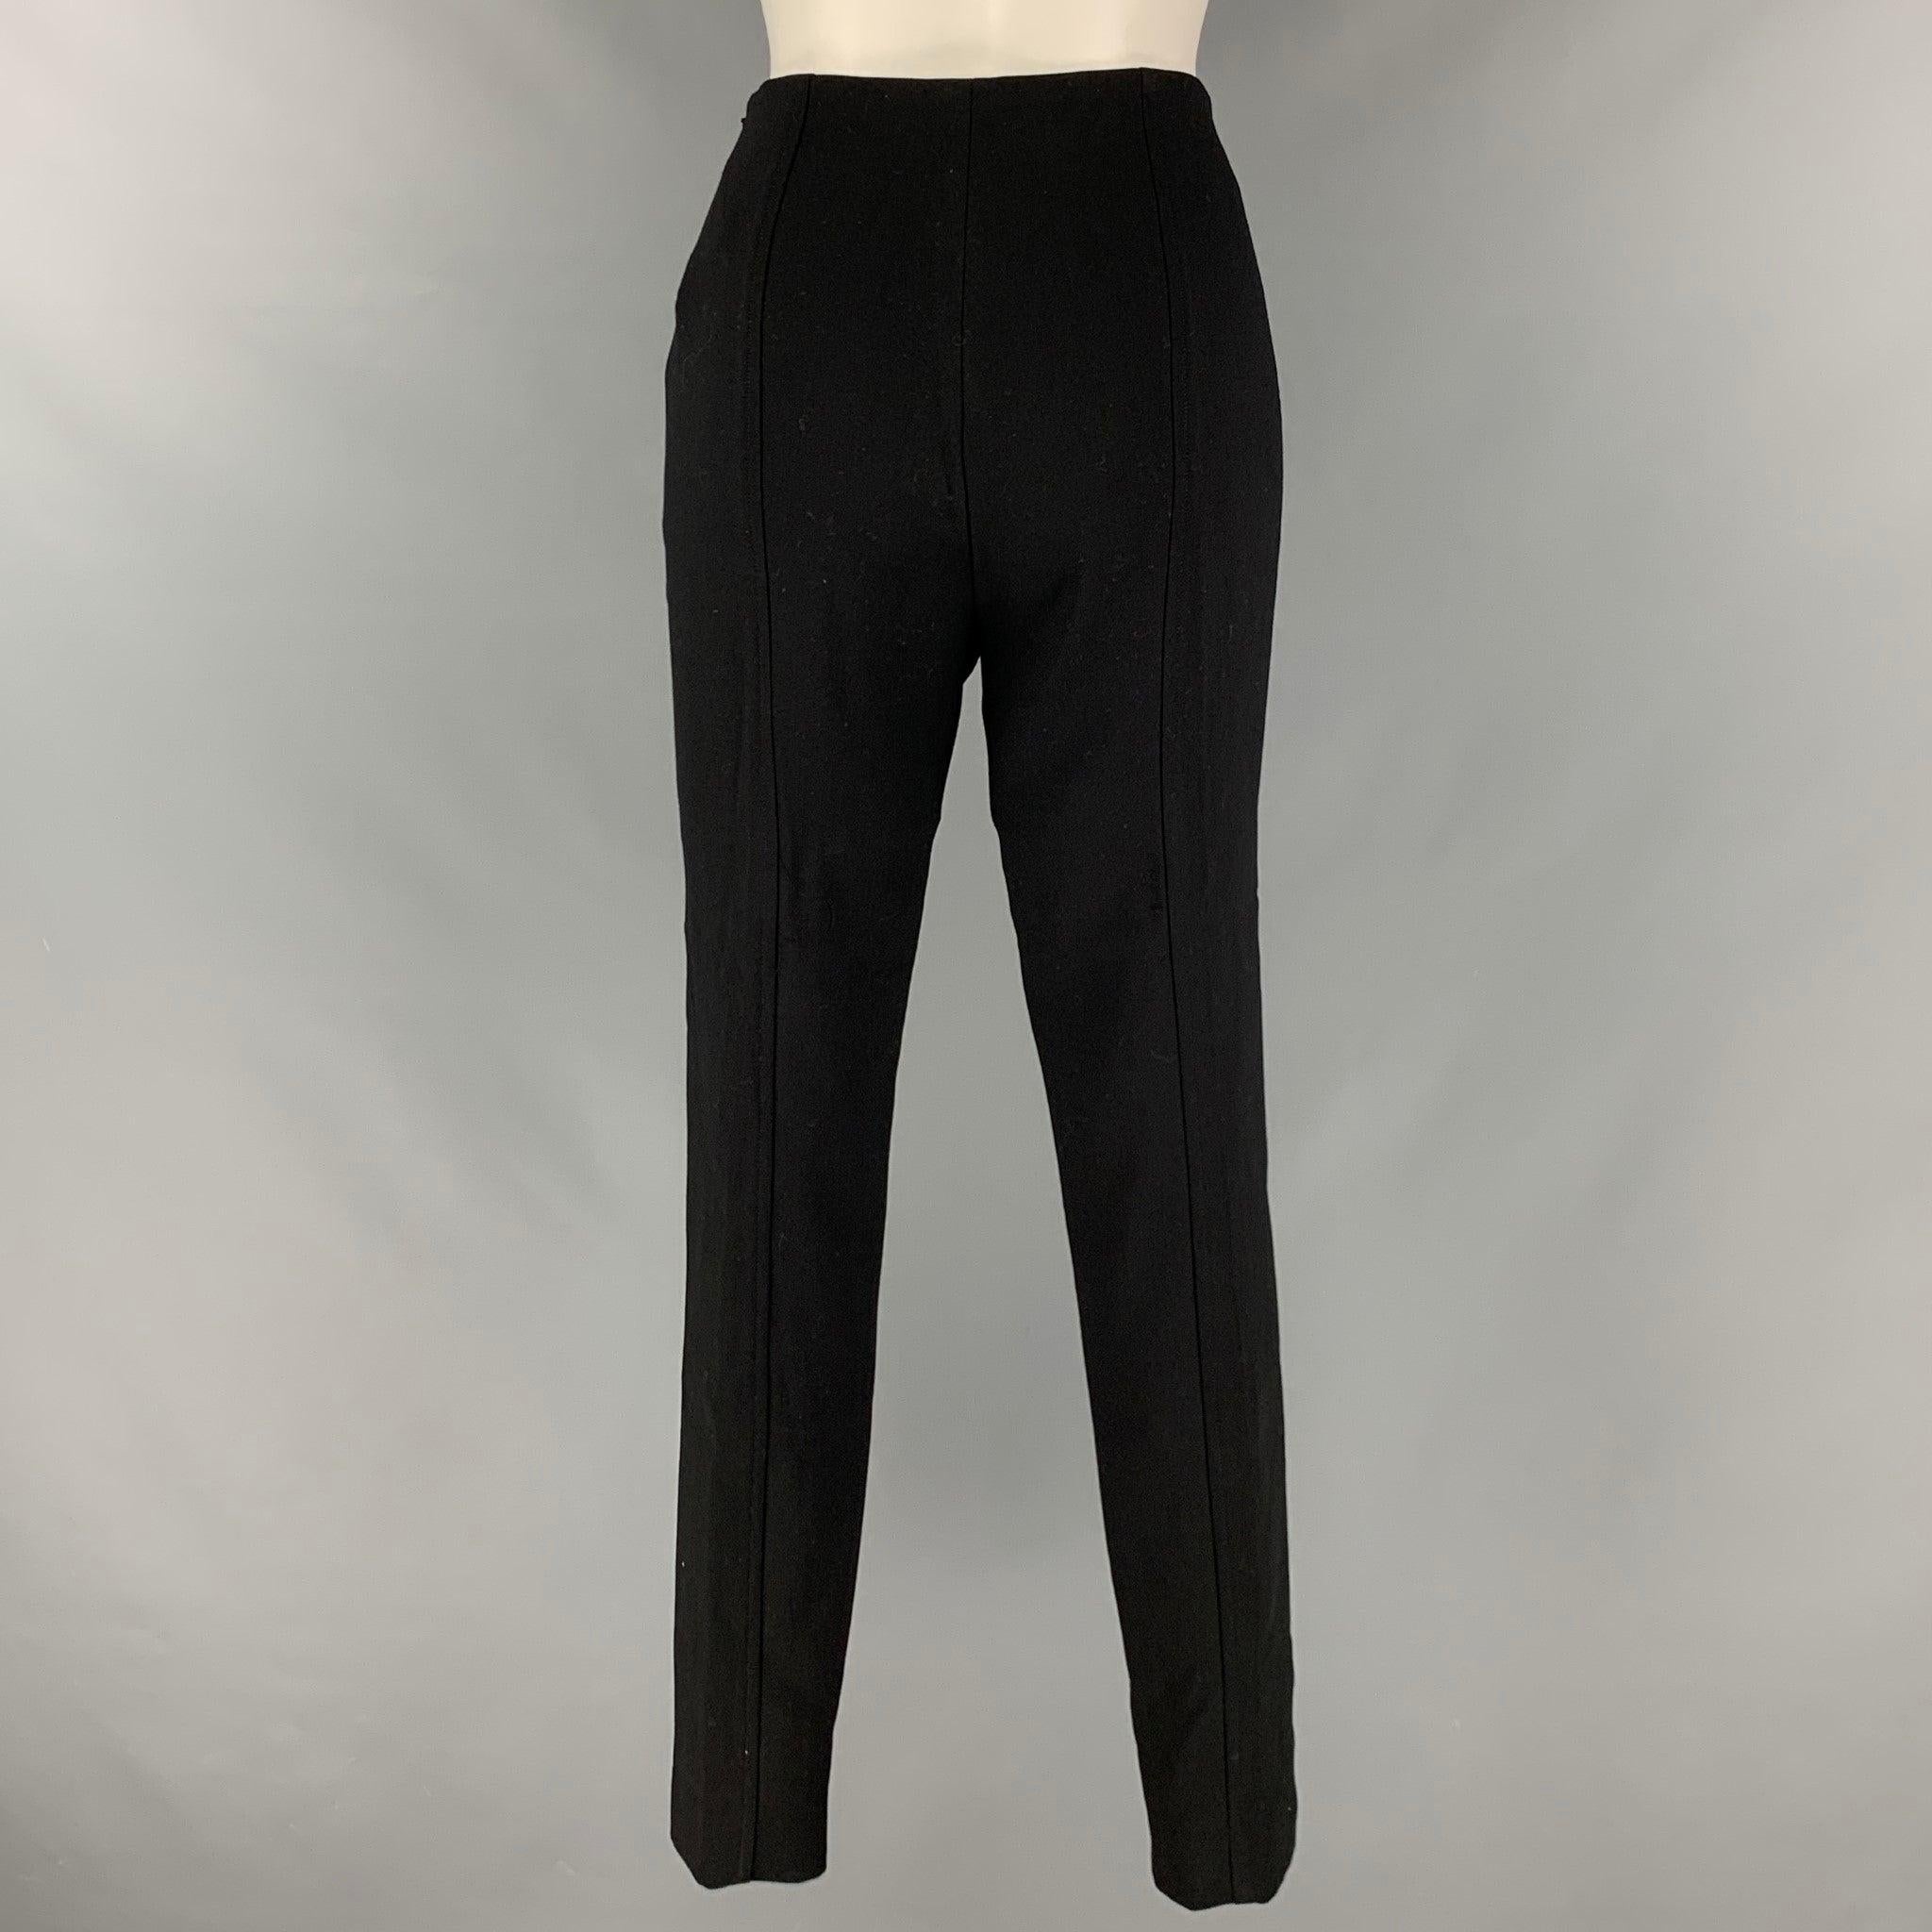 RALPH LAUREN COLLECTION dress pants comes in a black wool knit material featuring a fitted style, zipper cuffs, and a sized zip up closure. Made in USA.Excellent Pre- Owned Condition. 

Marked:  6 

Measurements: 
 Waist: 28 inches Rise: 10.5 inches